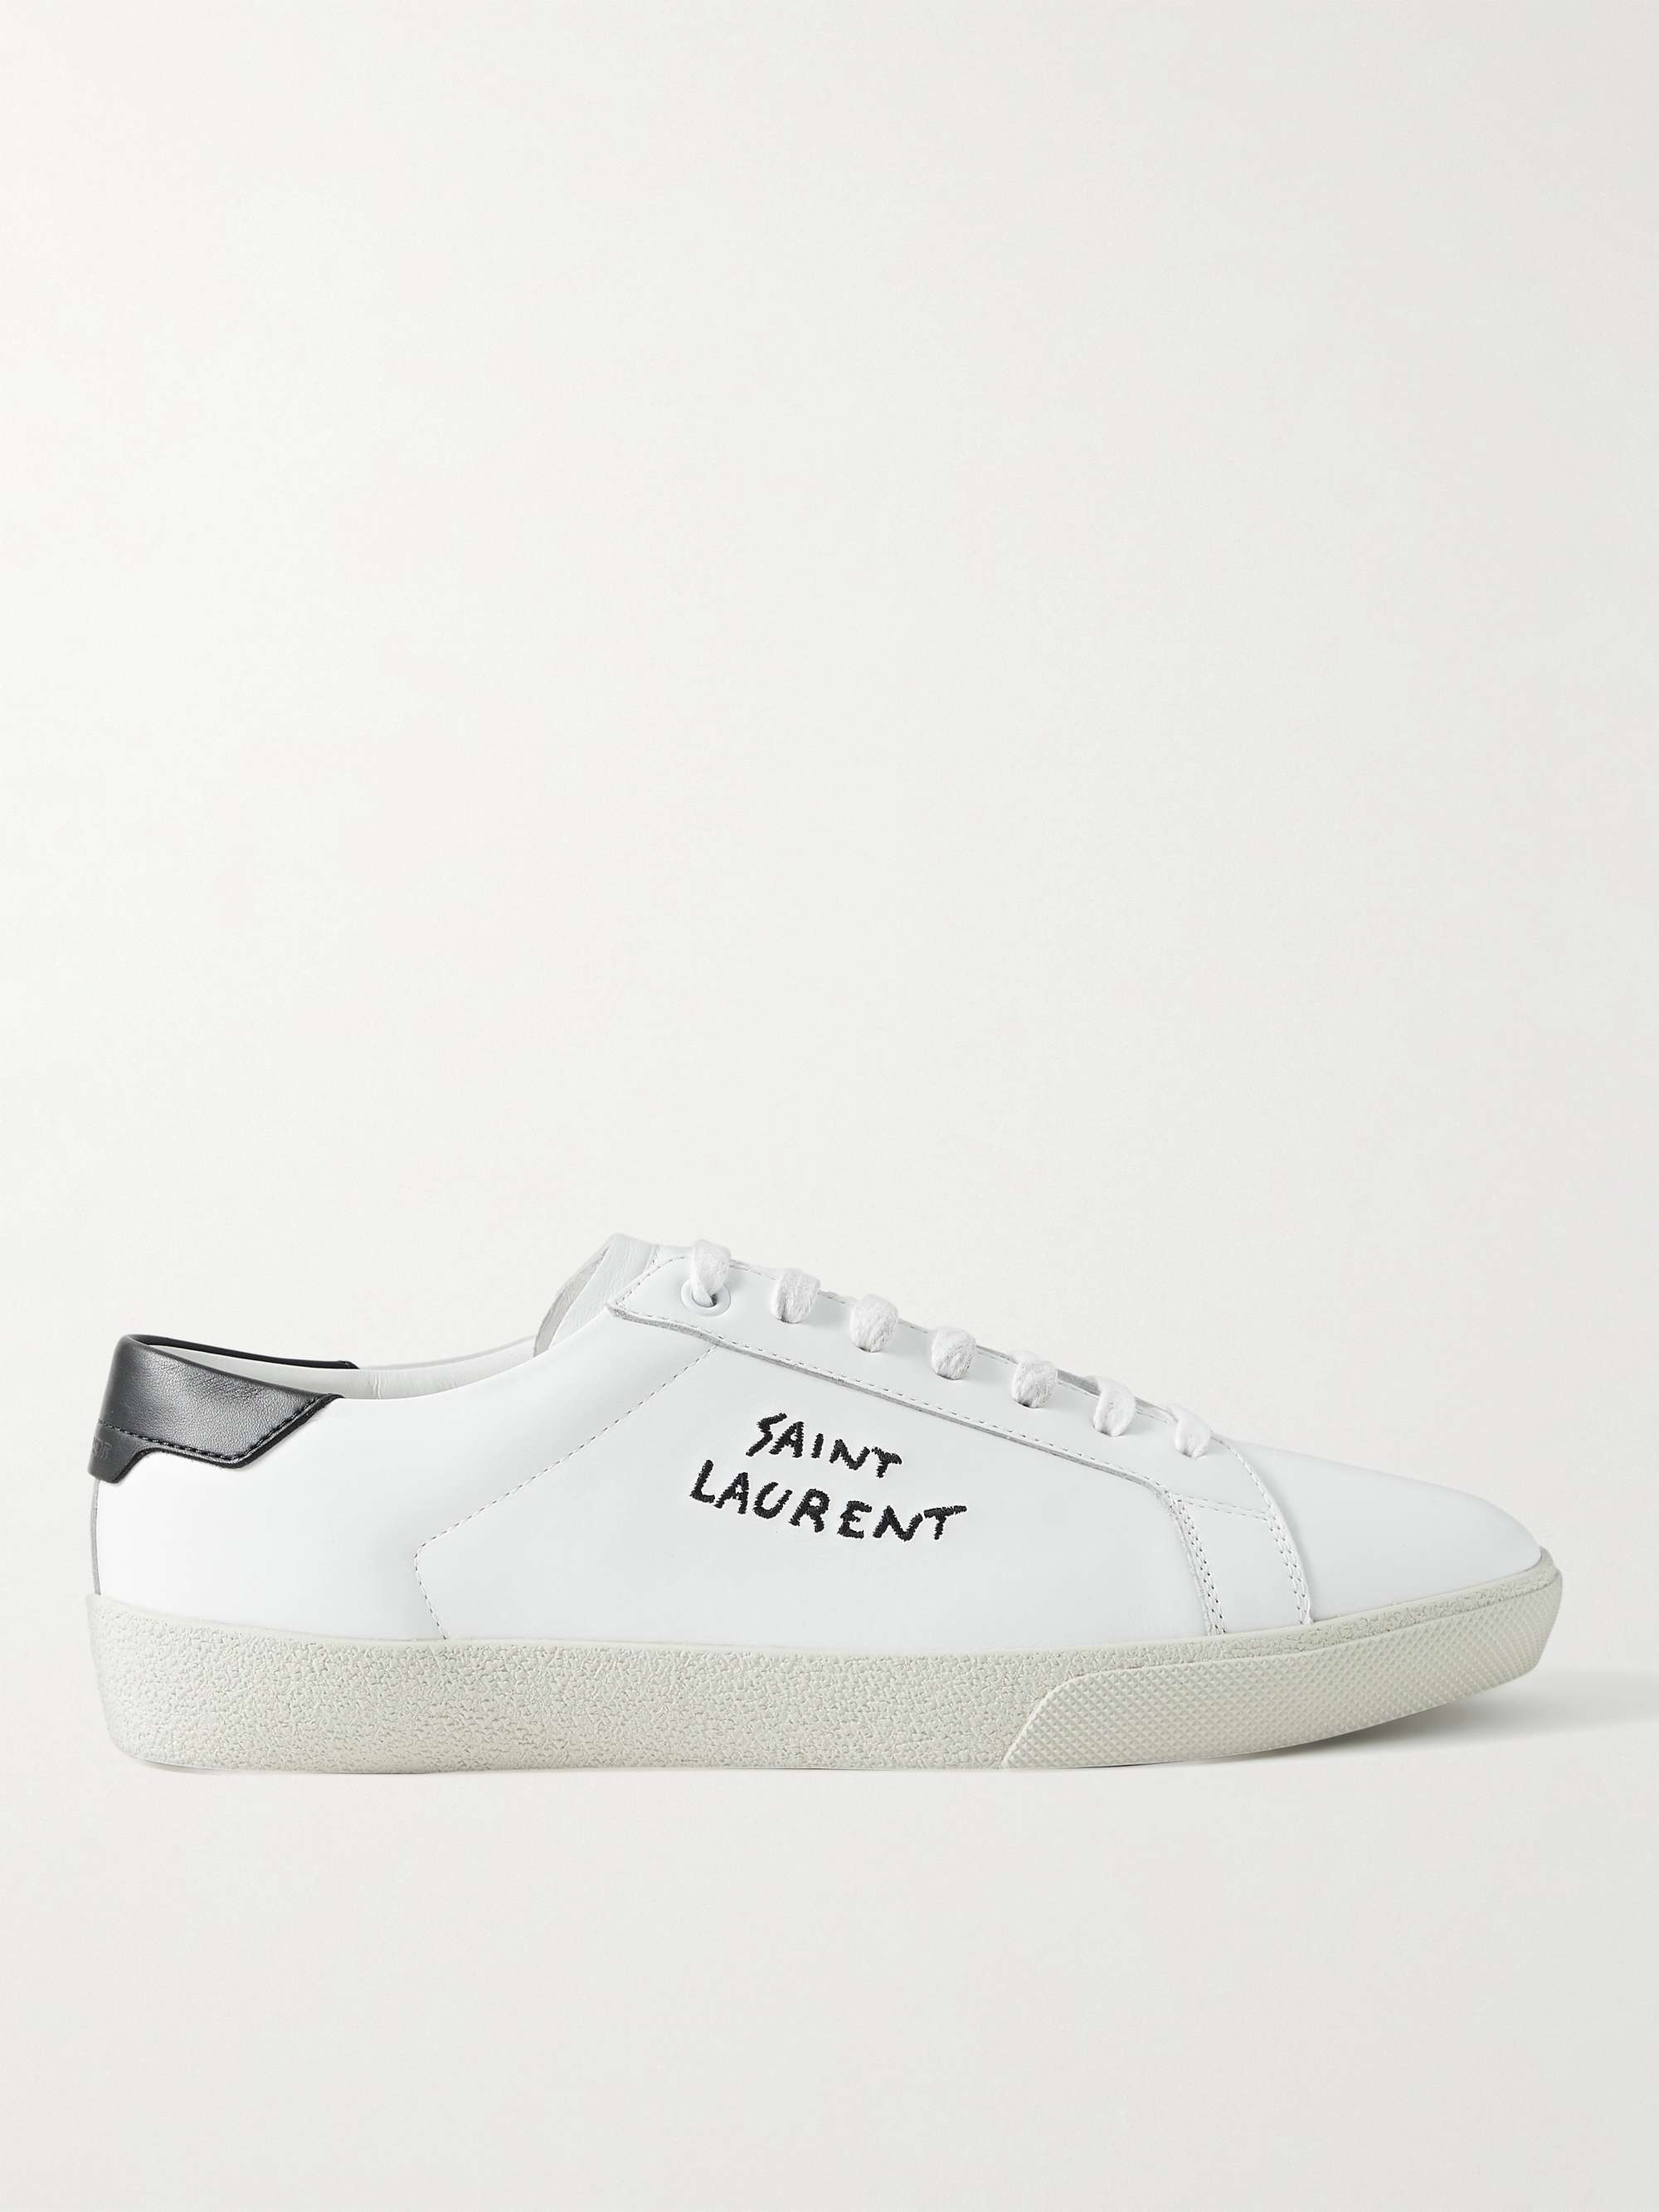 SAINT LAURENT SL/06 Court Classic Logo-Embroidered Leather Sneakers for Men | MR